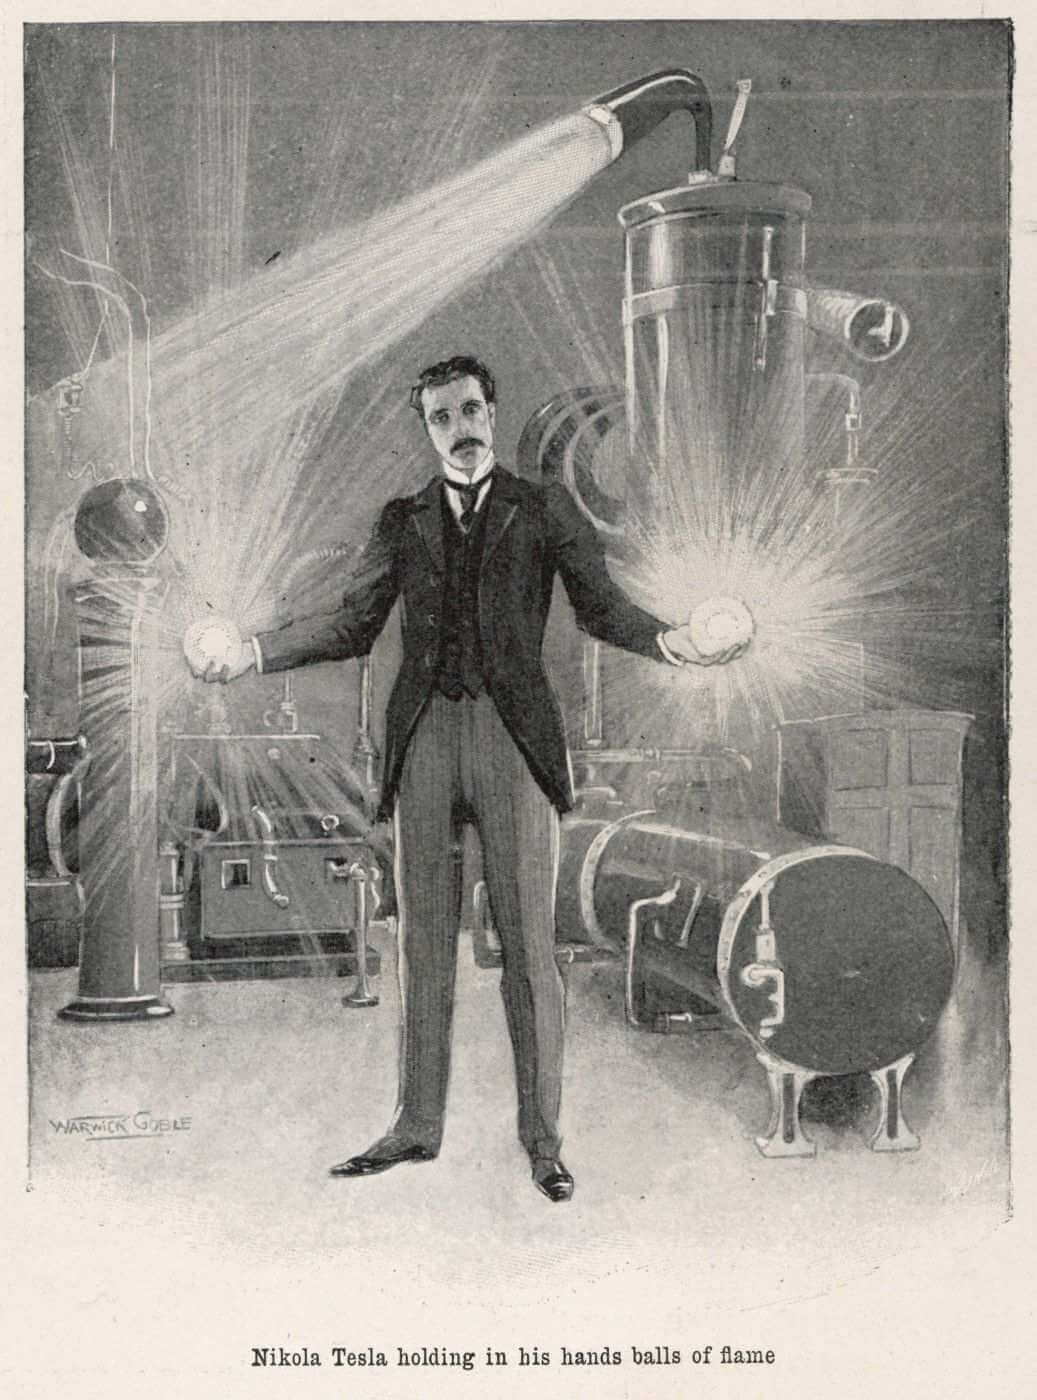 Did Project Pegasus harness Nikola Tesla’s discoveries to make time travel possible? 